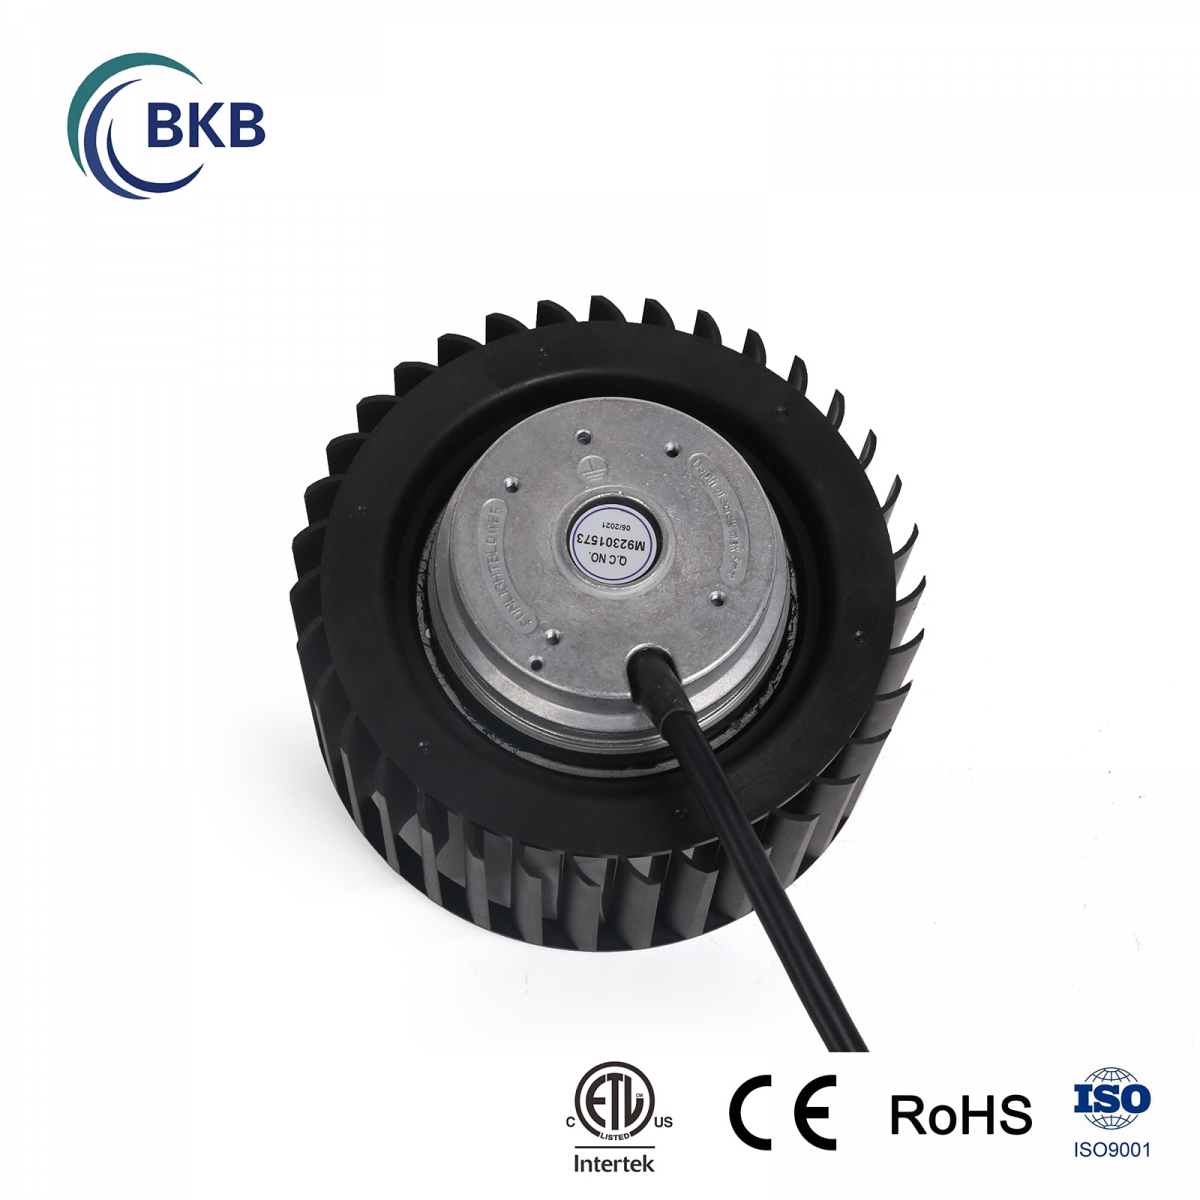 Plastic forward curved centrifugal fans Φ160-SUNLIGHT BLOWER,Centrifugal Fans, Inline Fans,Motors,Backward curved centrifugal fans ,Forward curved centrifugal fans ,inlet fans, EC fans